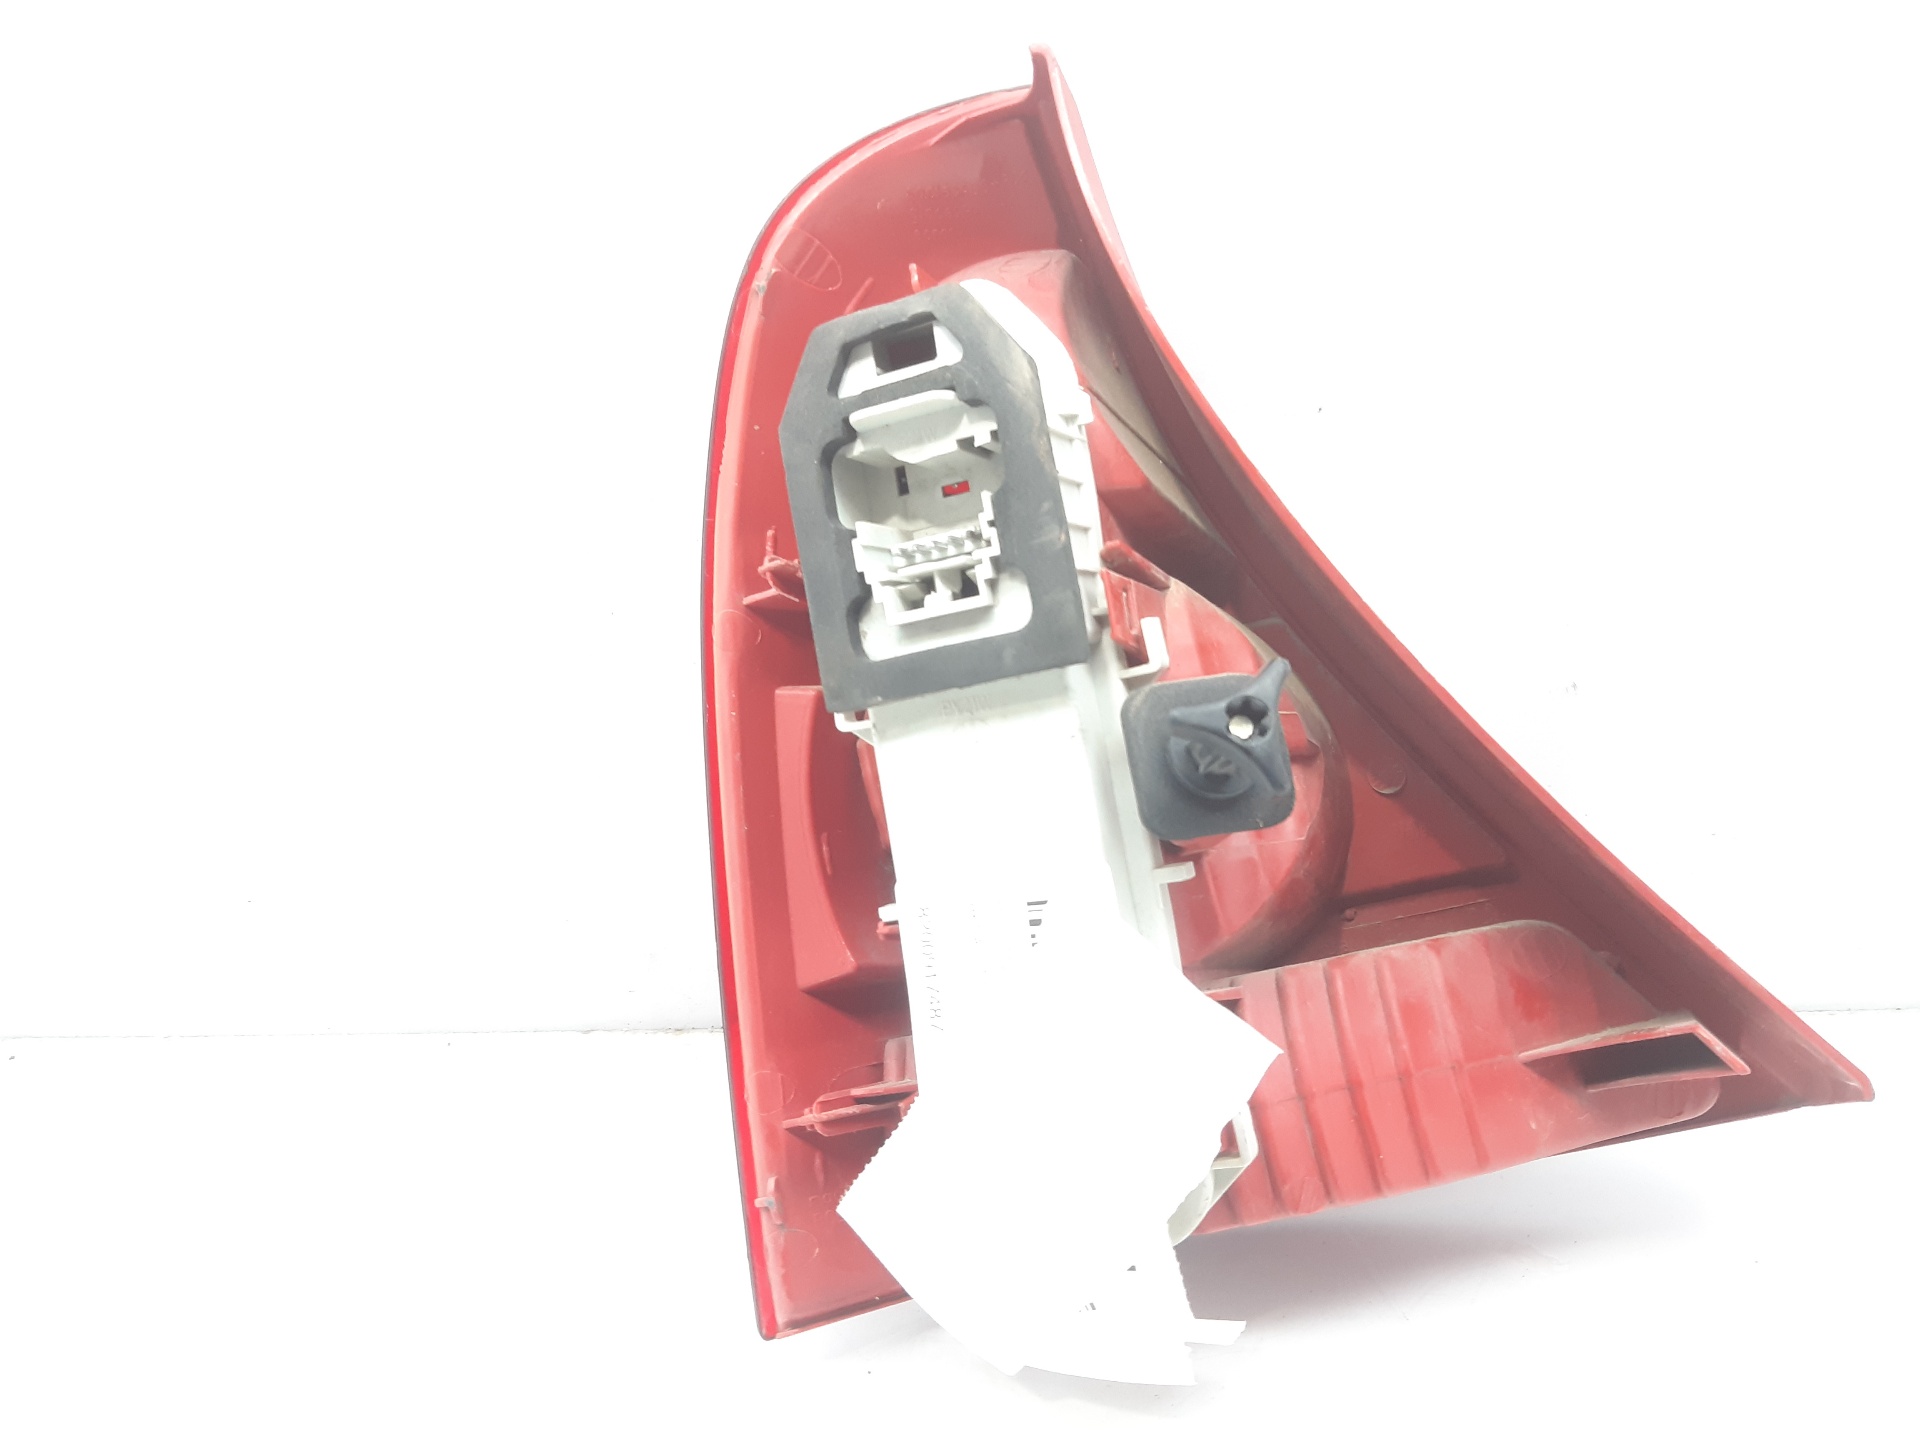 RENAULT Clio 3 generation (2005-2012) Rear Right Taillight Lamp 8200917487 22455448